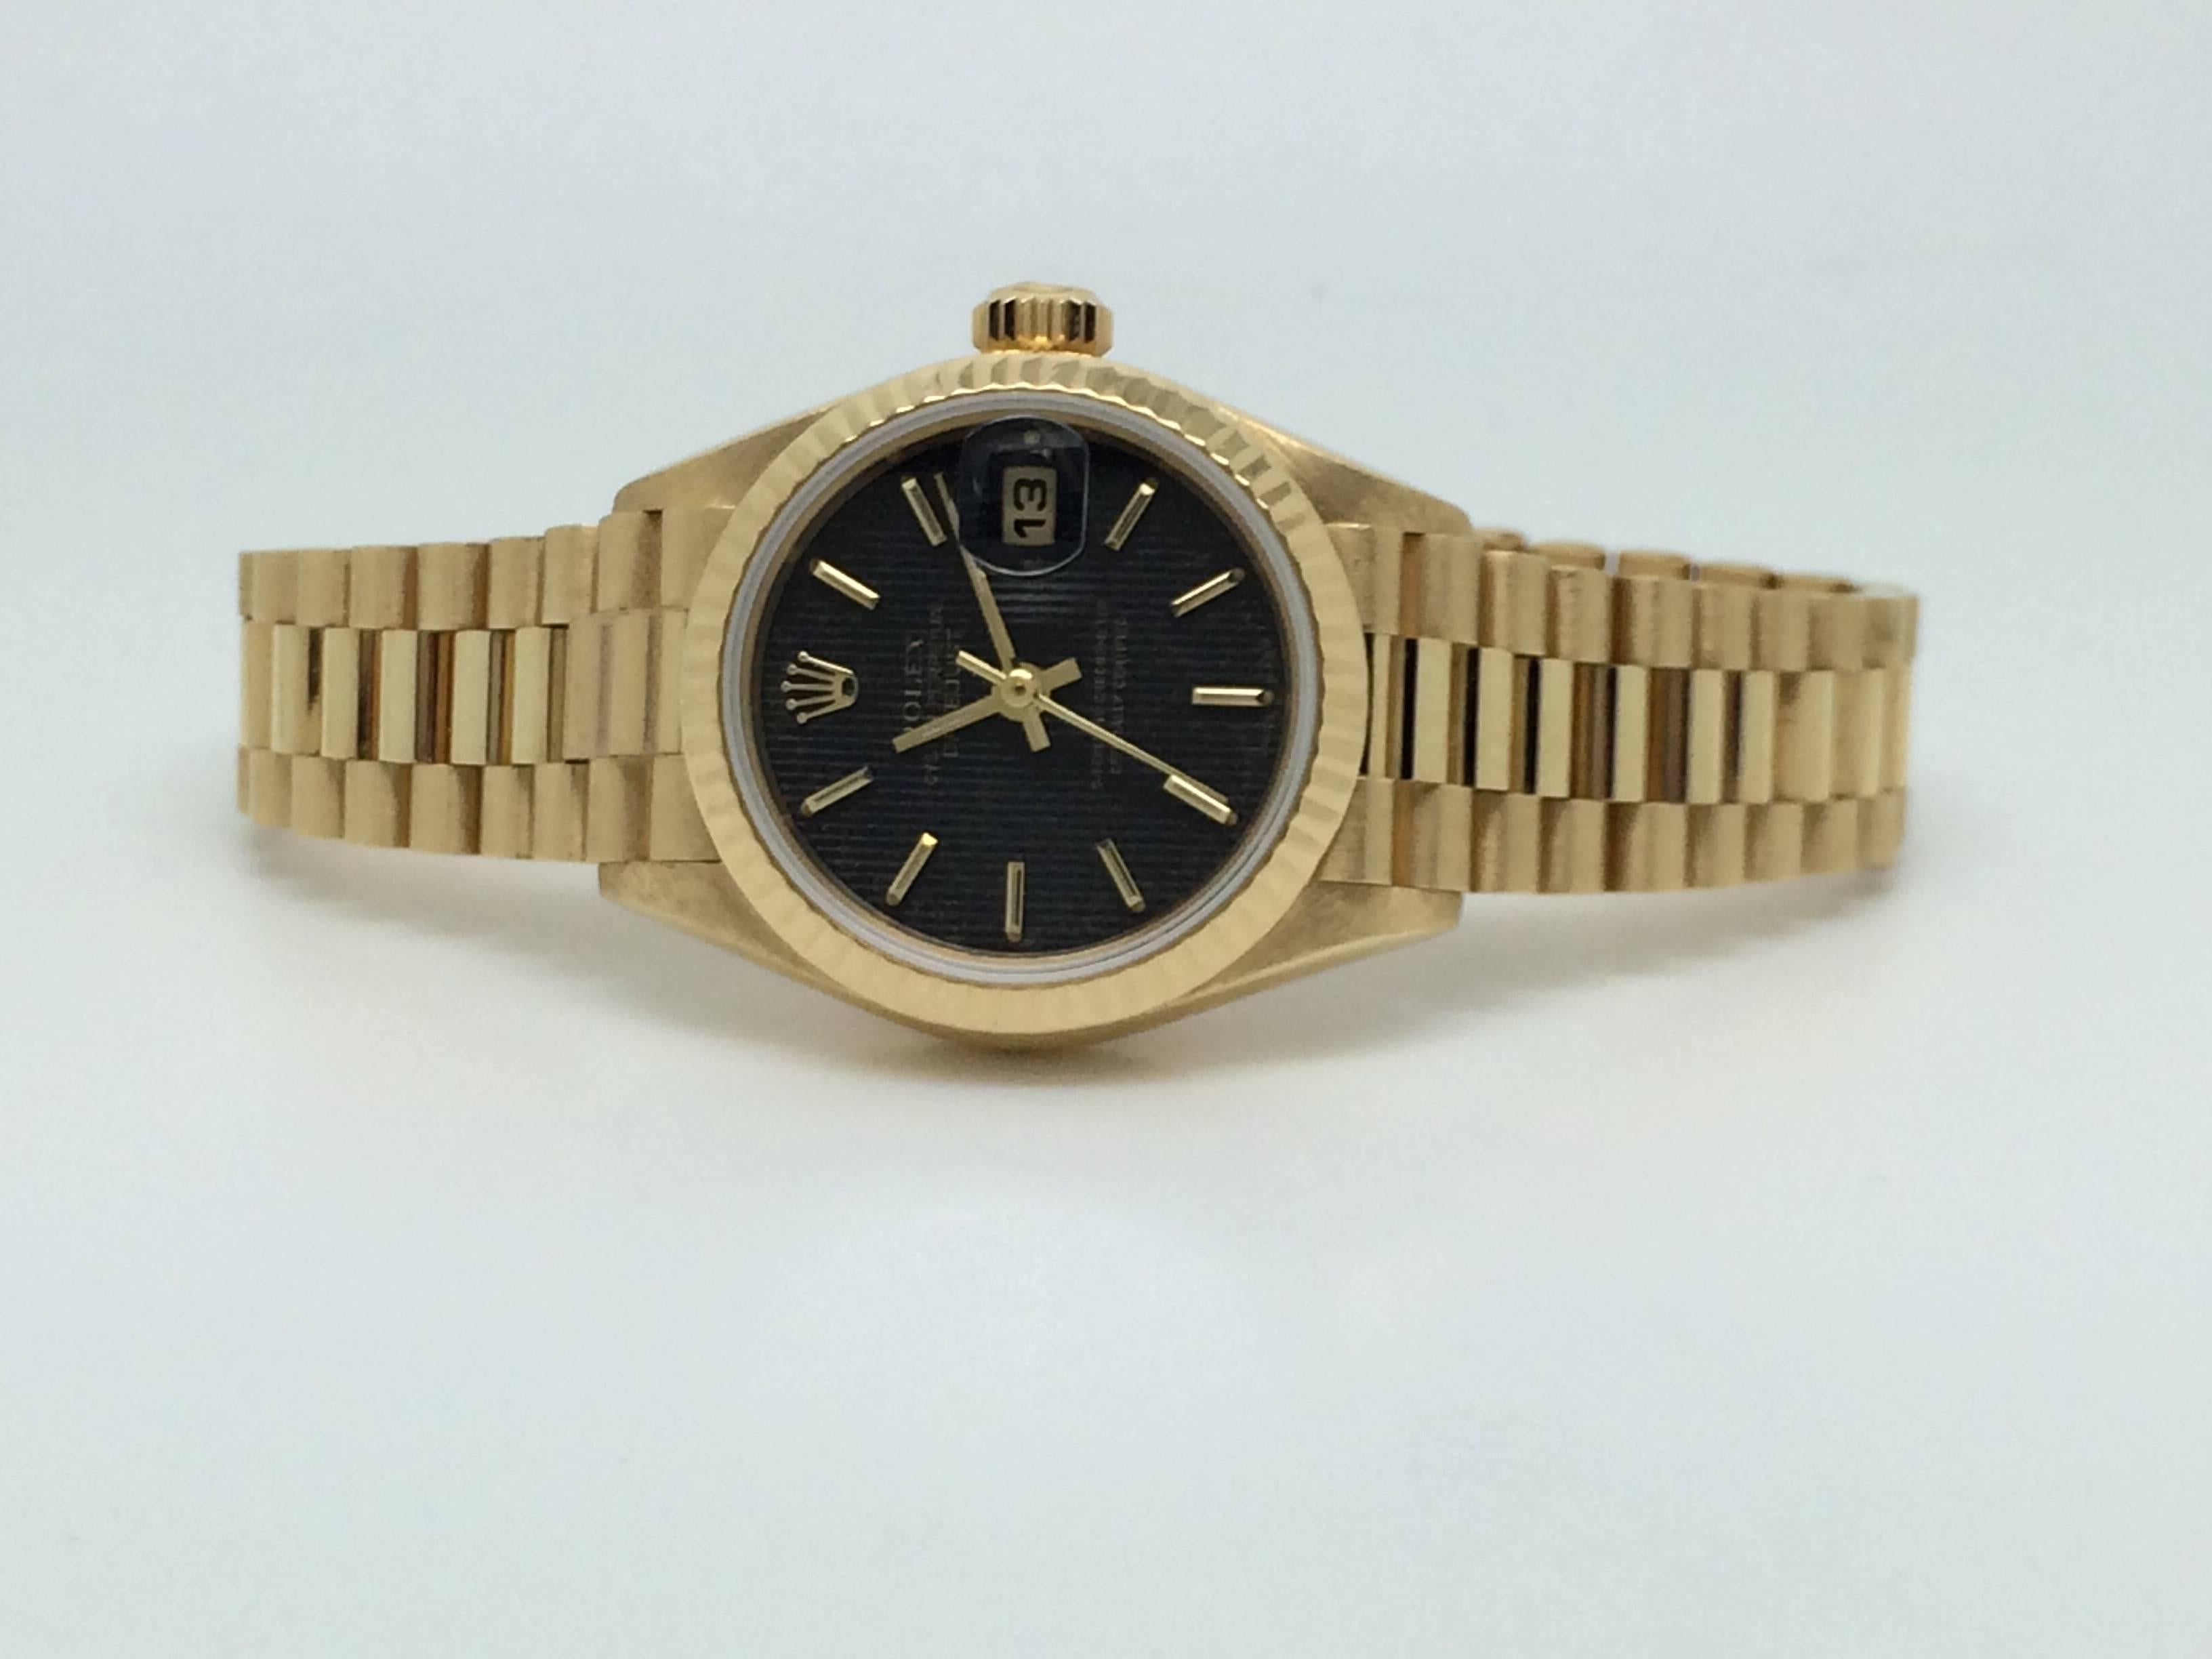 Rolex Yellow Gold Datejust President Wristwatch. 26mm diameter, automatic winding, fluted bezel, Rolex President bracelet. Timepiece features an original black dial, Pre-owned, circa 1993 and recently serviced by authorized Rolex technician. Model #